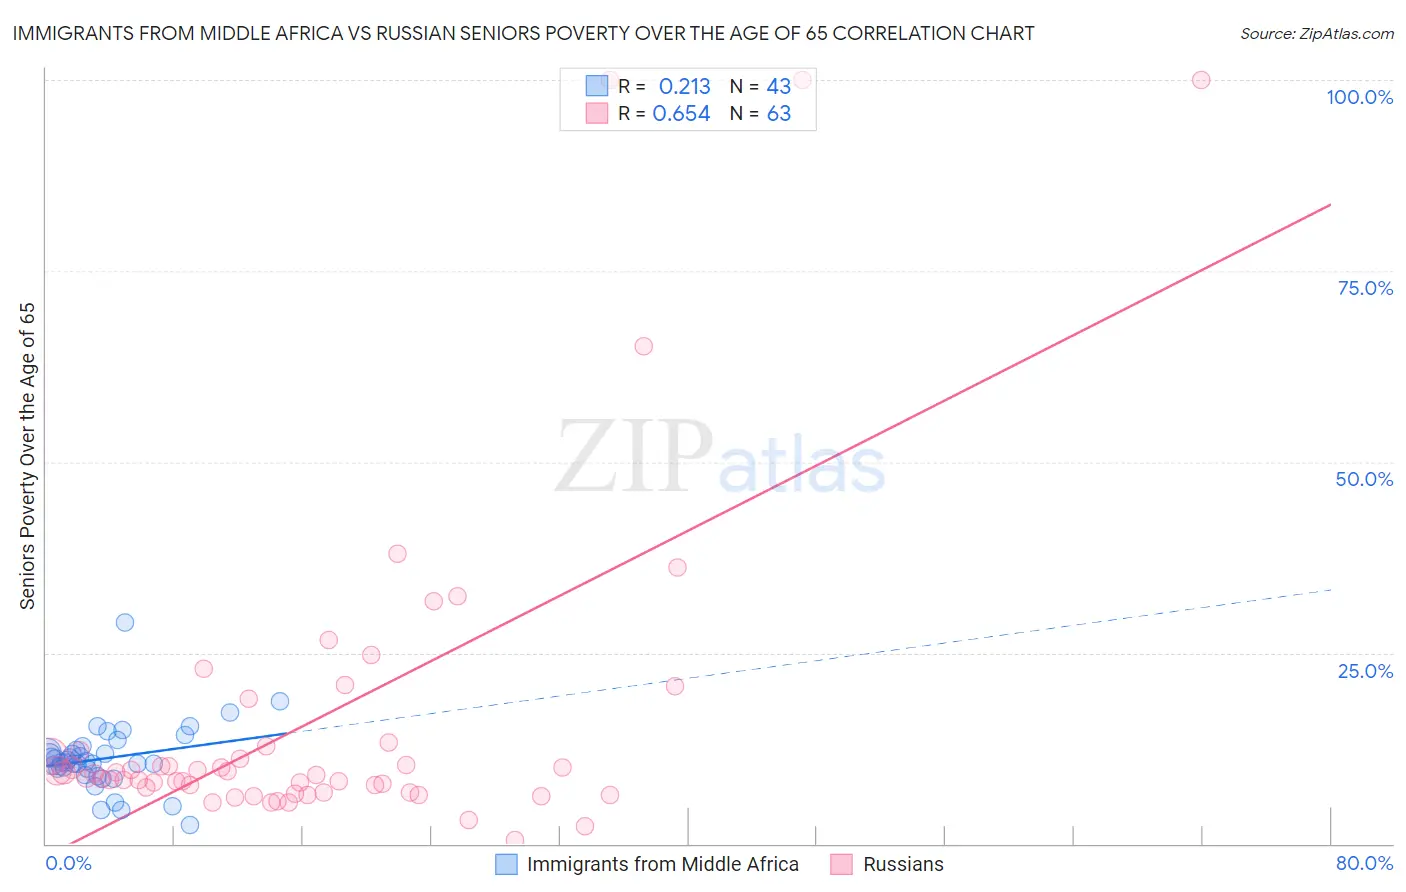 Immigrants from Middle Africa vs Russian Seniors Poverty Over the Age of 65